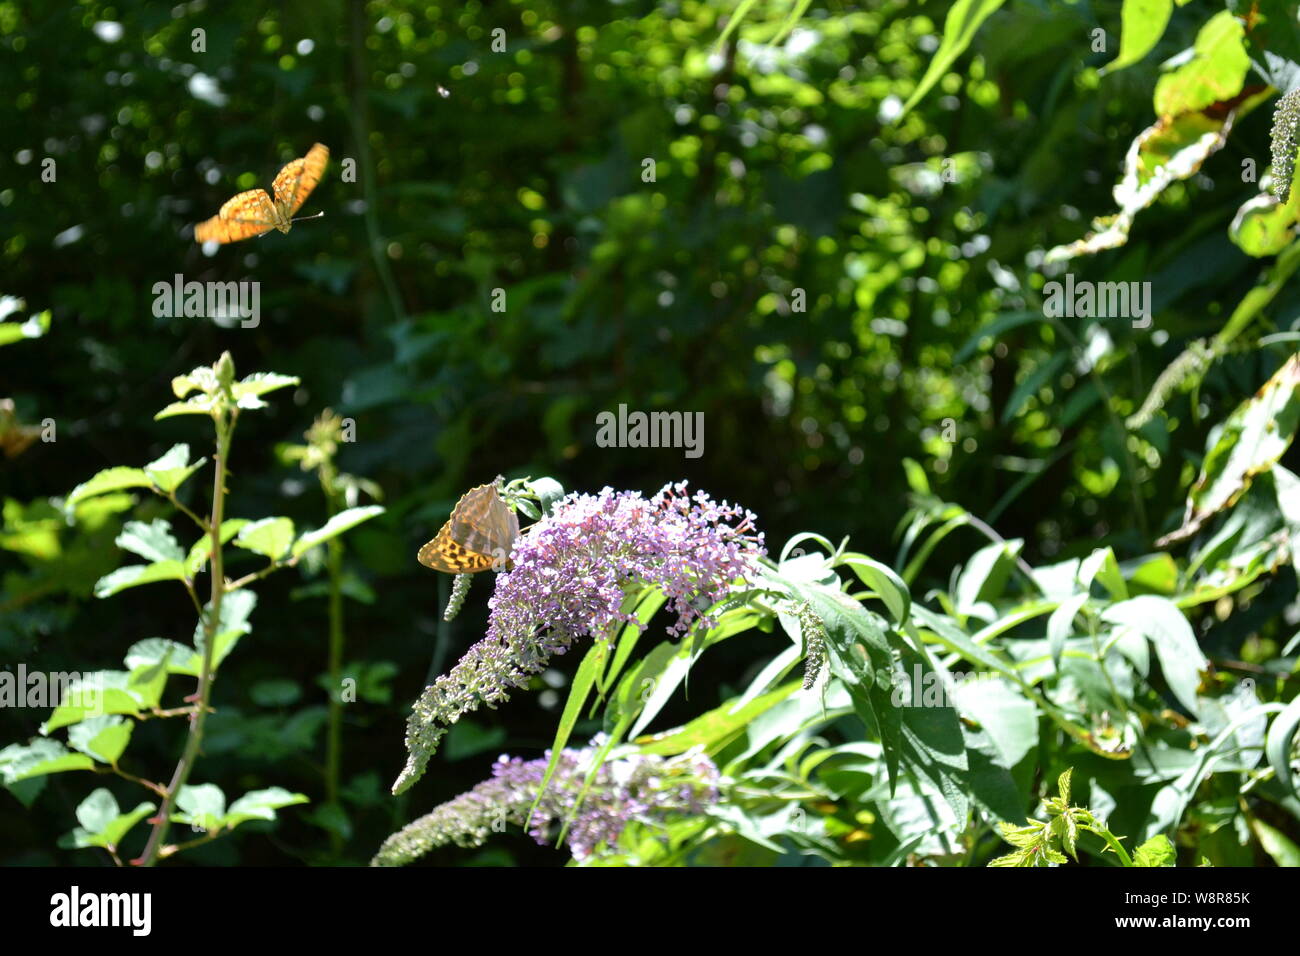 Butterfly fritillary Argynnis paphia feeding on buddleja flowers in the forest. Stock Photo